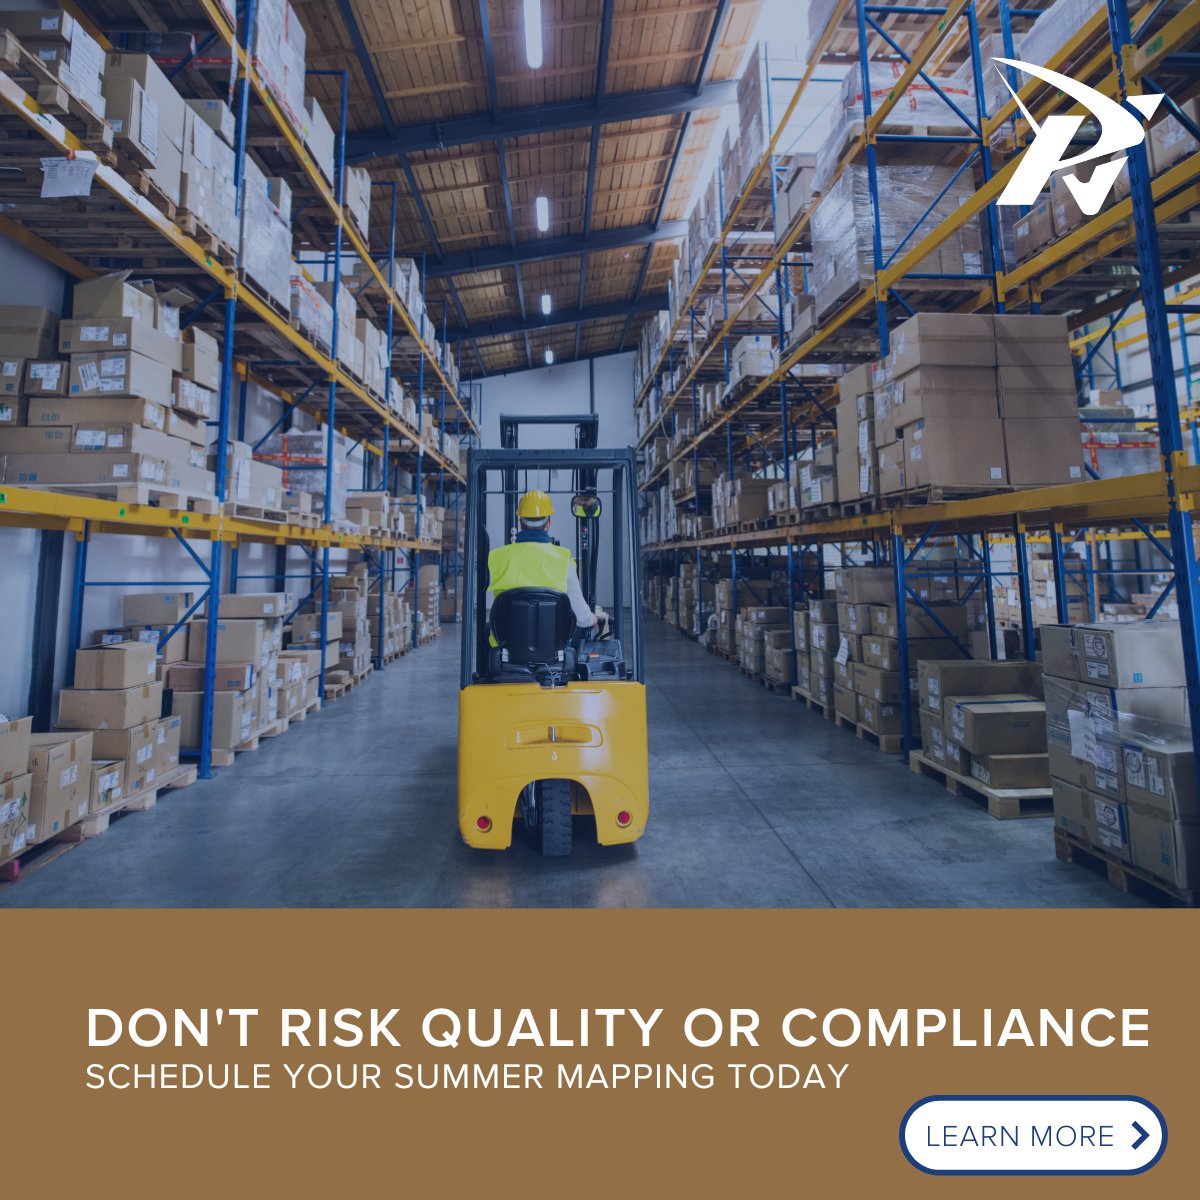 As summer begins, ensuring product quality and safety in rising temperatures is crucial. Safeguard your products and gain peace of mind. Schedule your summer mapping with PV today! #SummerMapping #QualityAssurance #ProductSafety #RegulatoryStandards #TemperatureControl